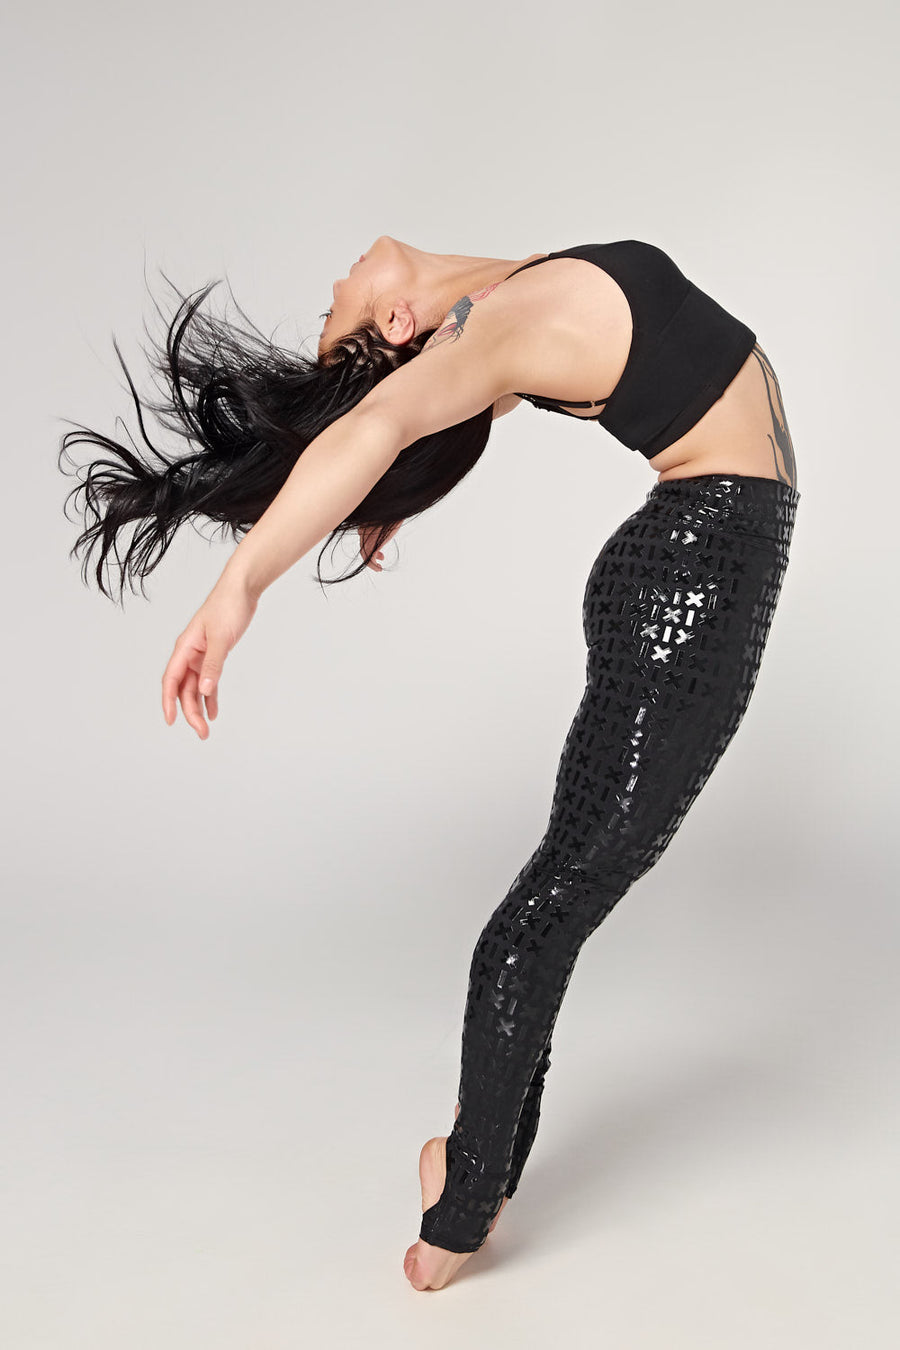 Black Leggings from CXIX! Pole And Aerial Wear at Aerial Attire!